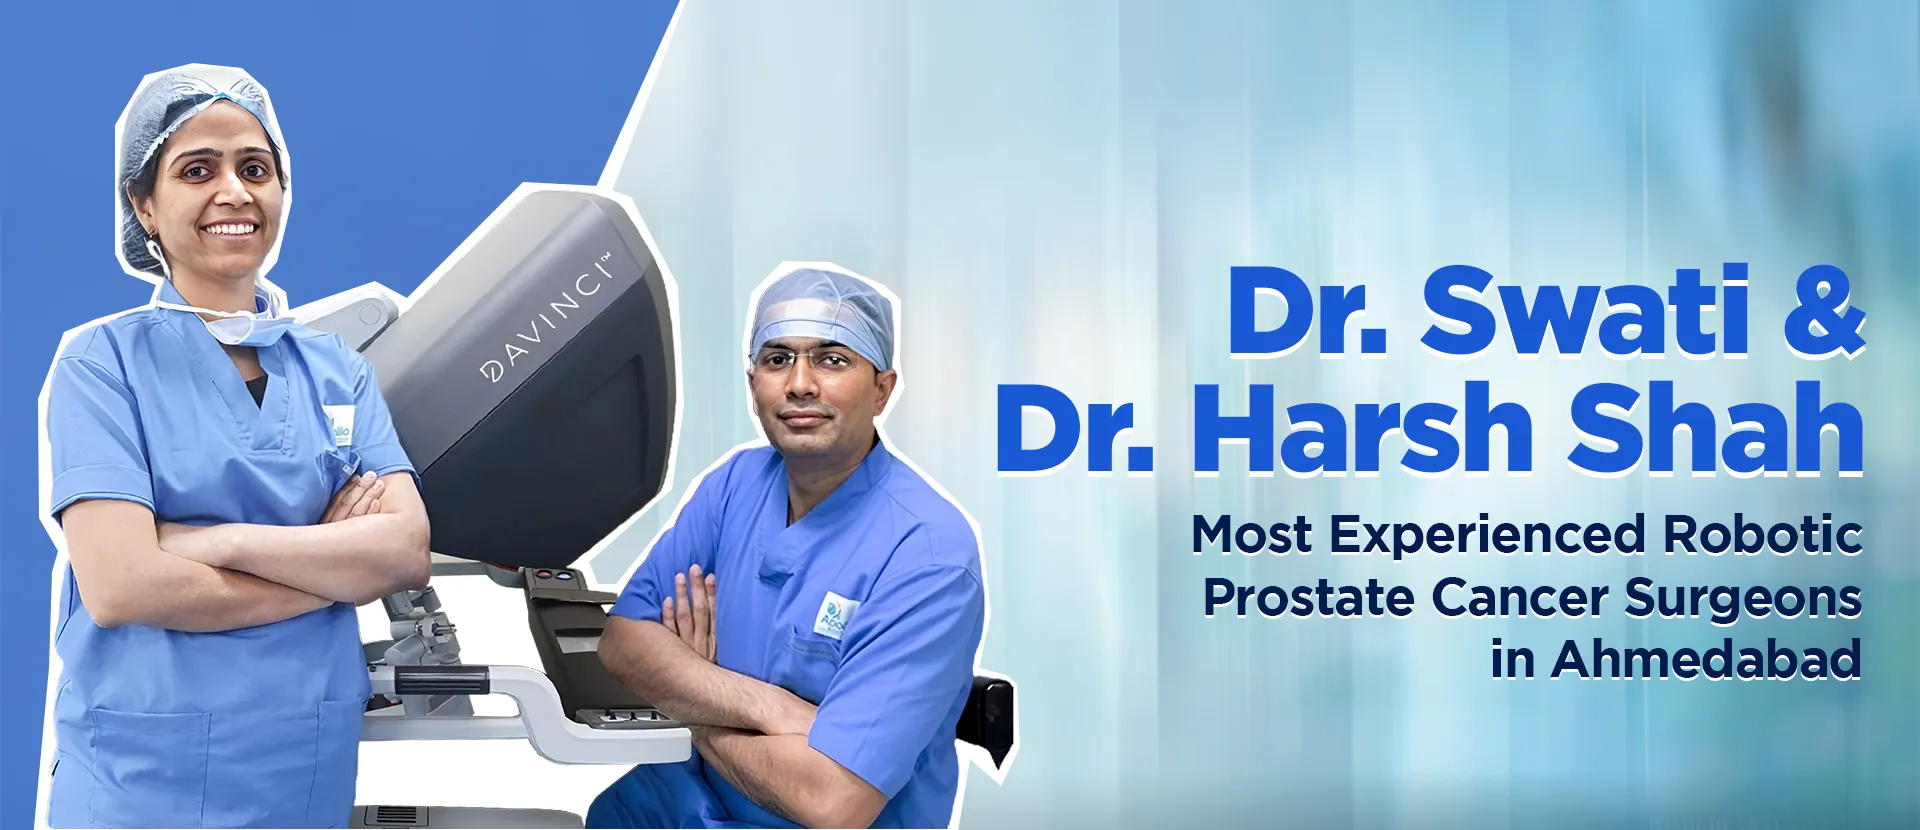 Best Prostate cancer Treatment with Robotic Surgery in Ahmedabad, Gujarat, India